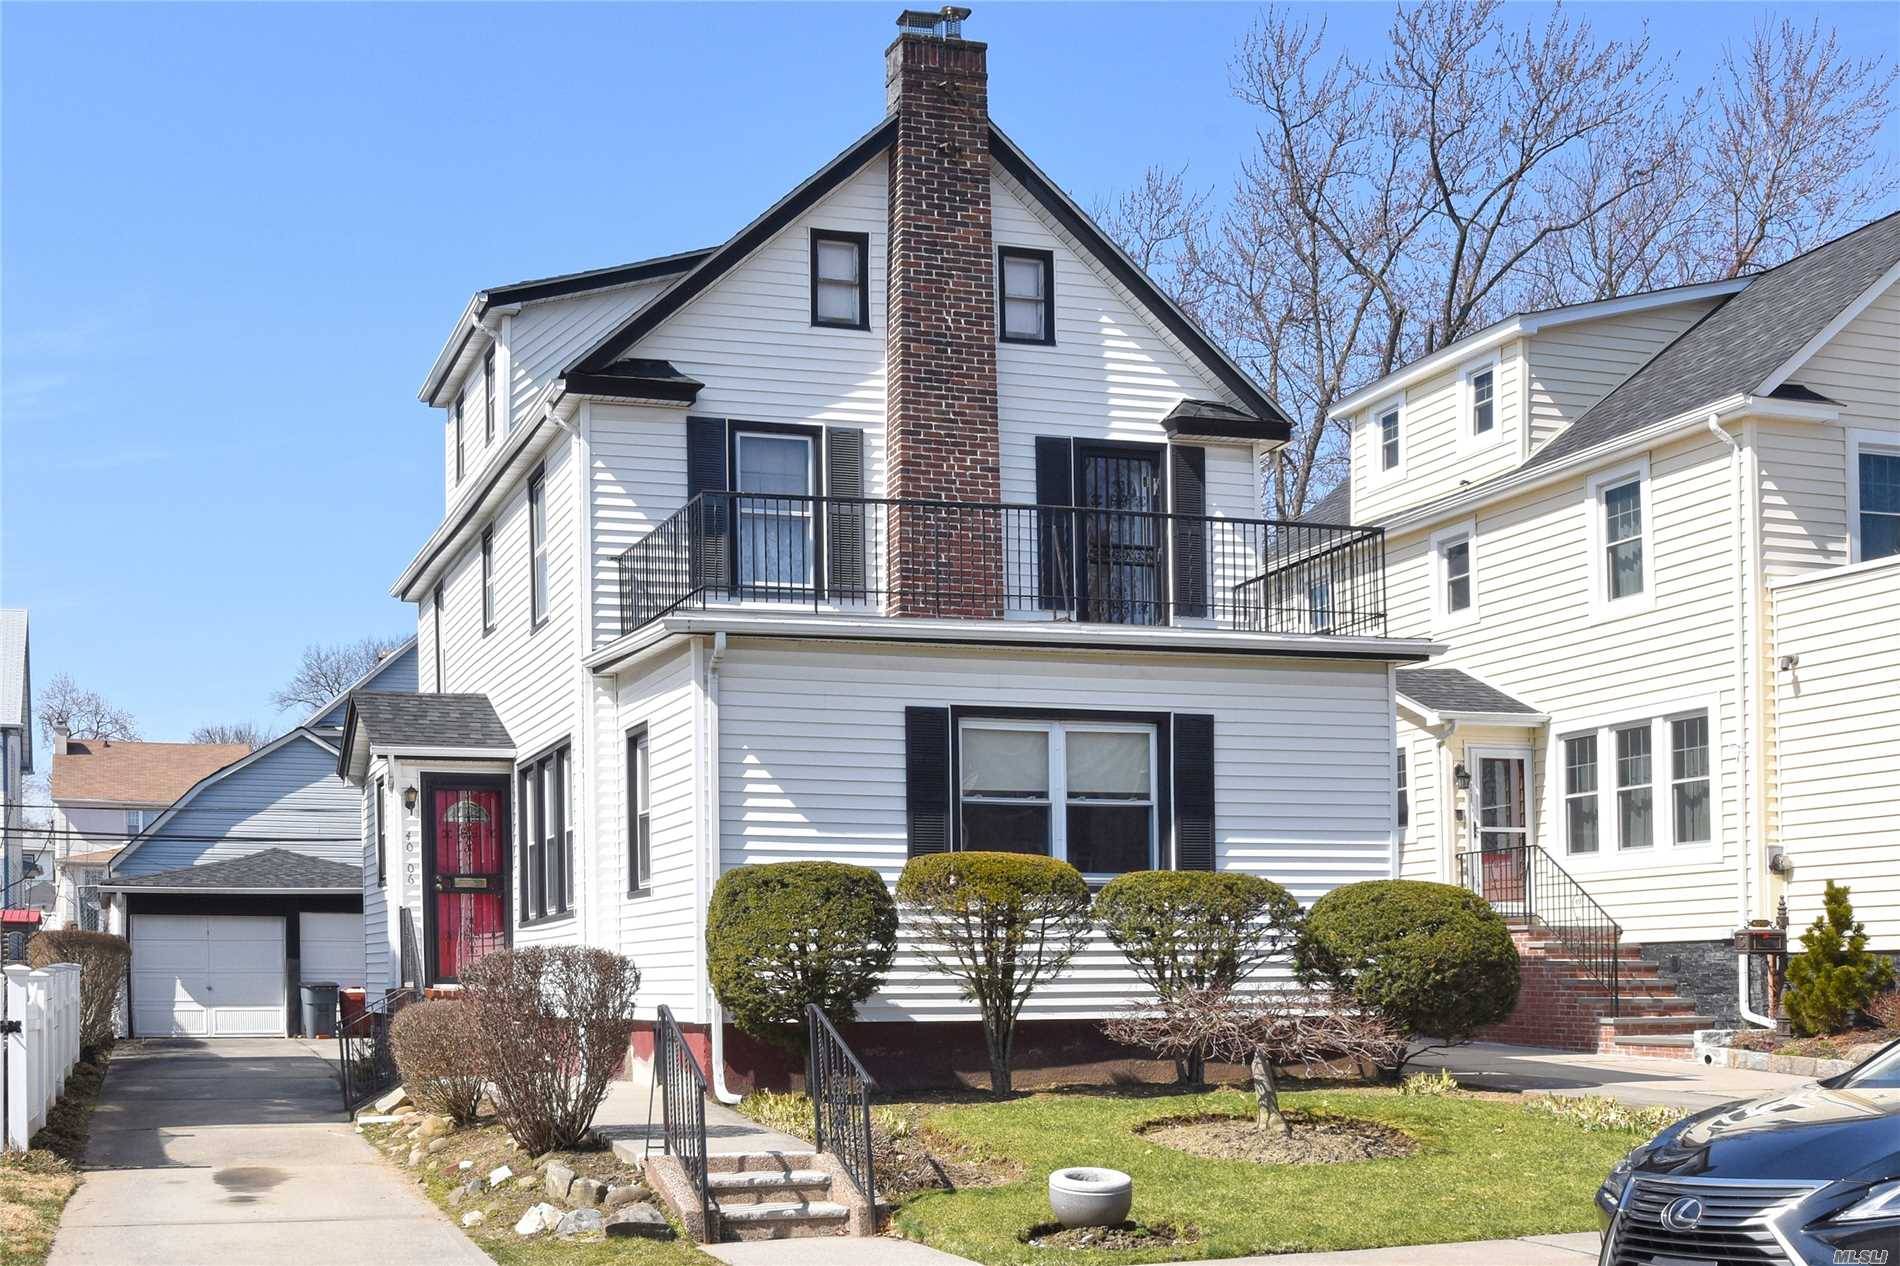 Lovely Dutch Colonial Home In Great Flushing Location.